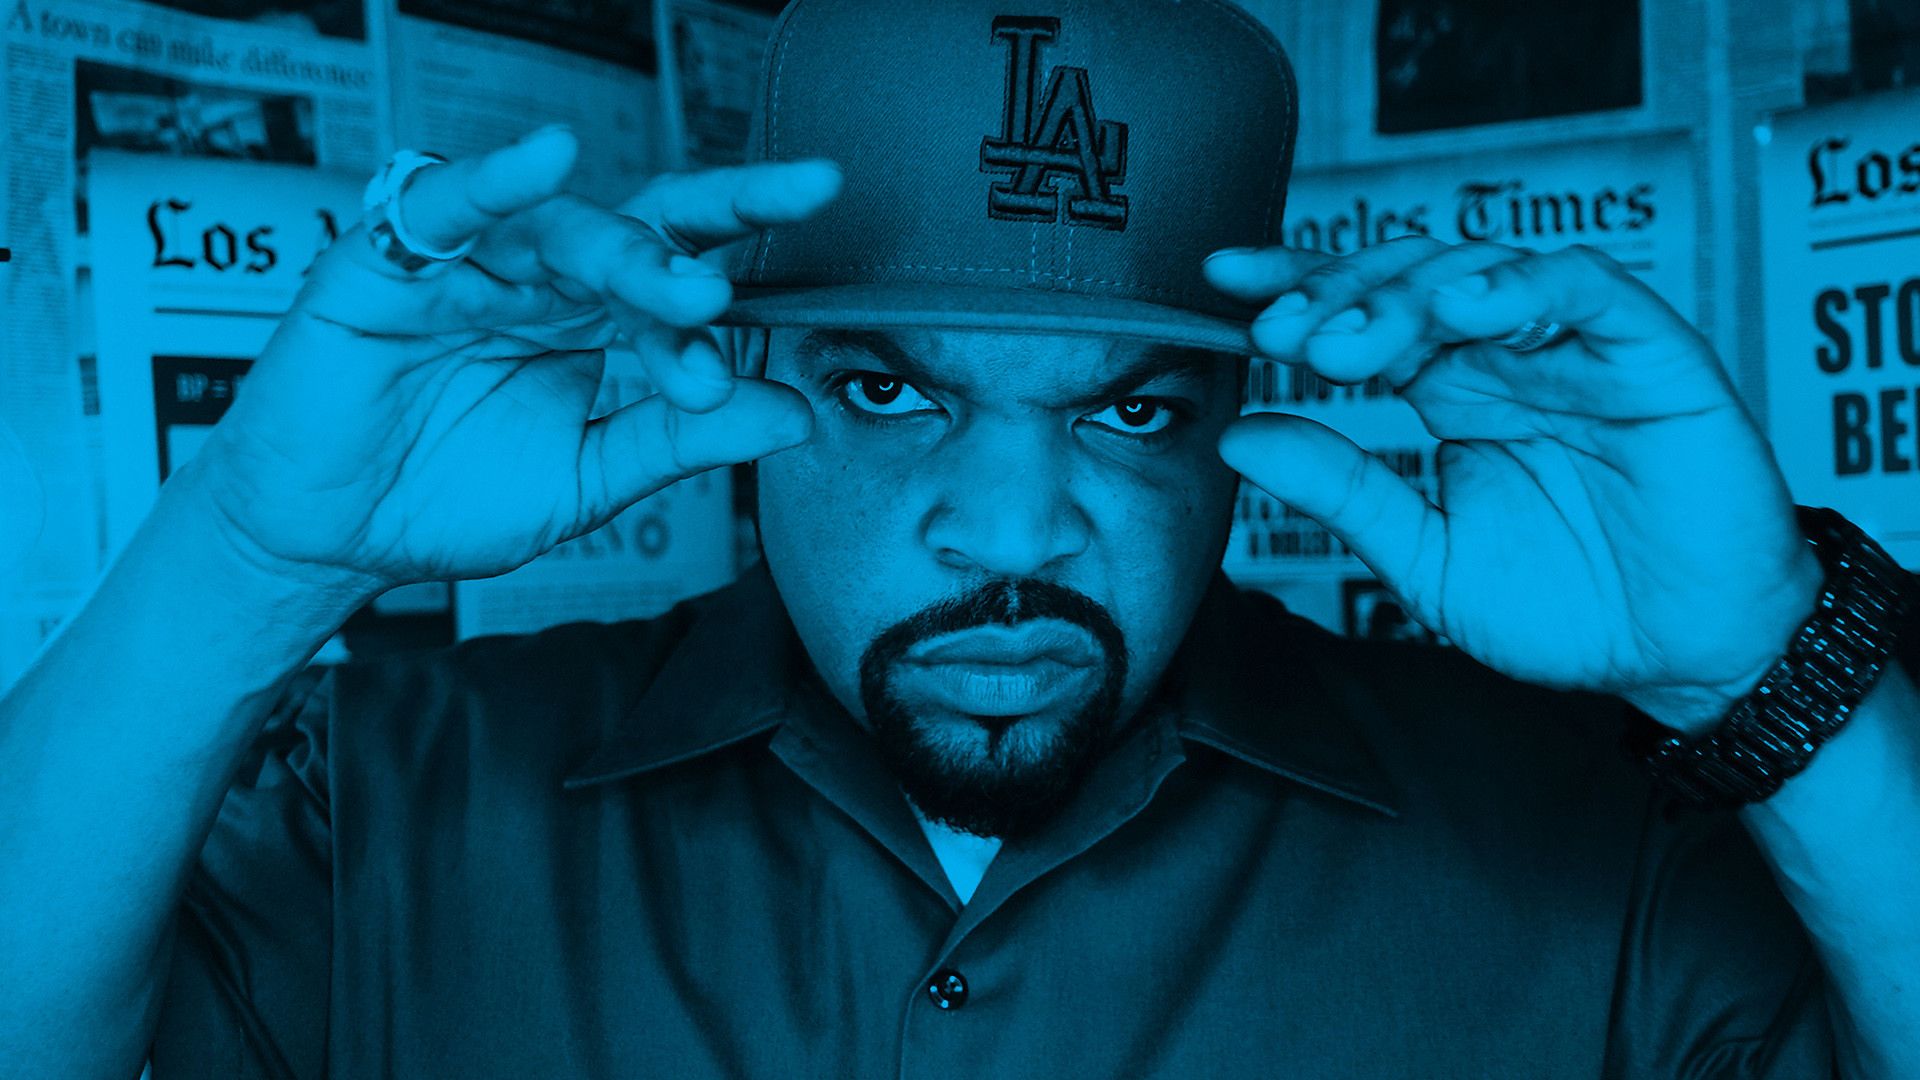 Ice cube down down. Ice Cube 1989. Ice Cube Rapper. Ice Cube 2022. Ice Cube n.w.a.